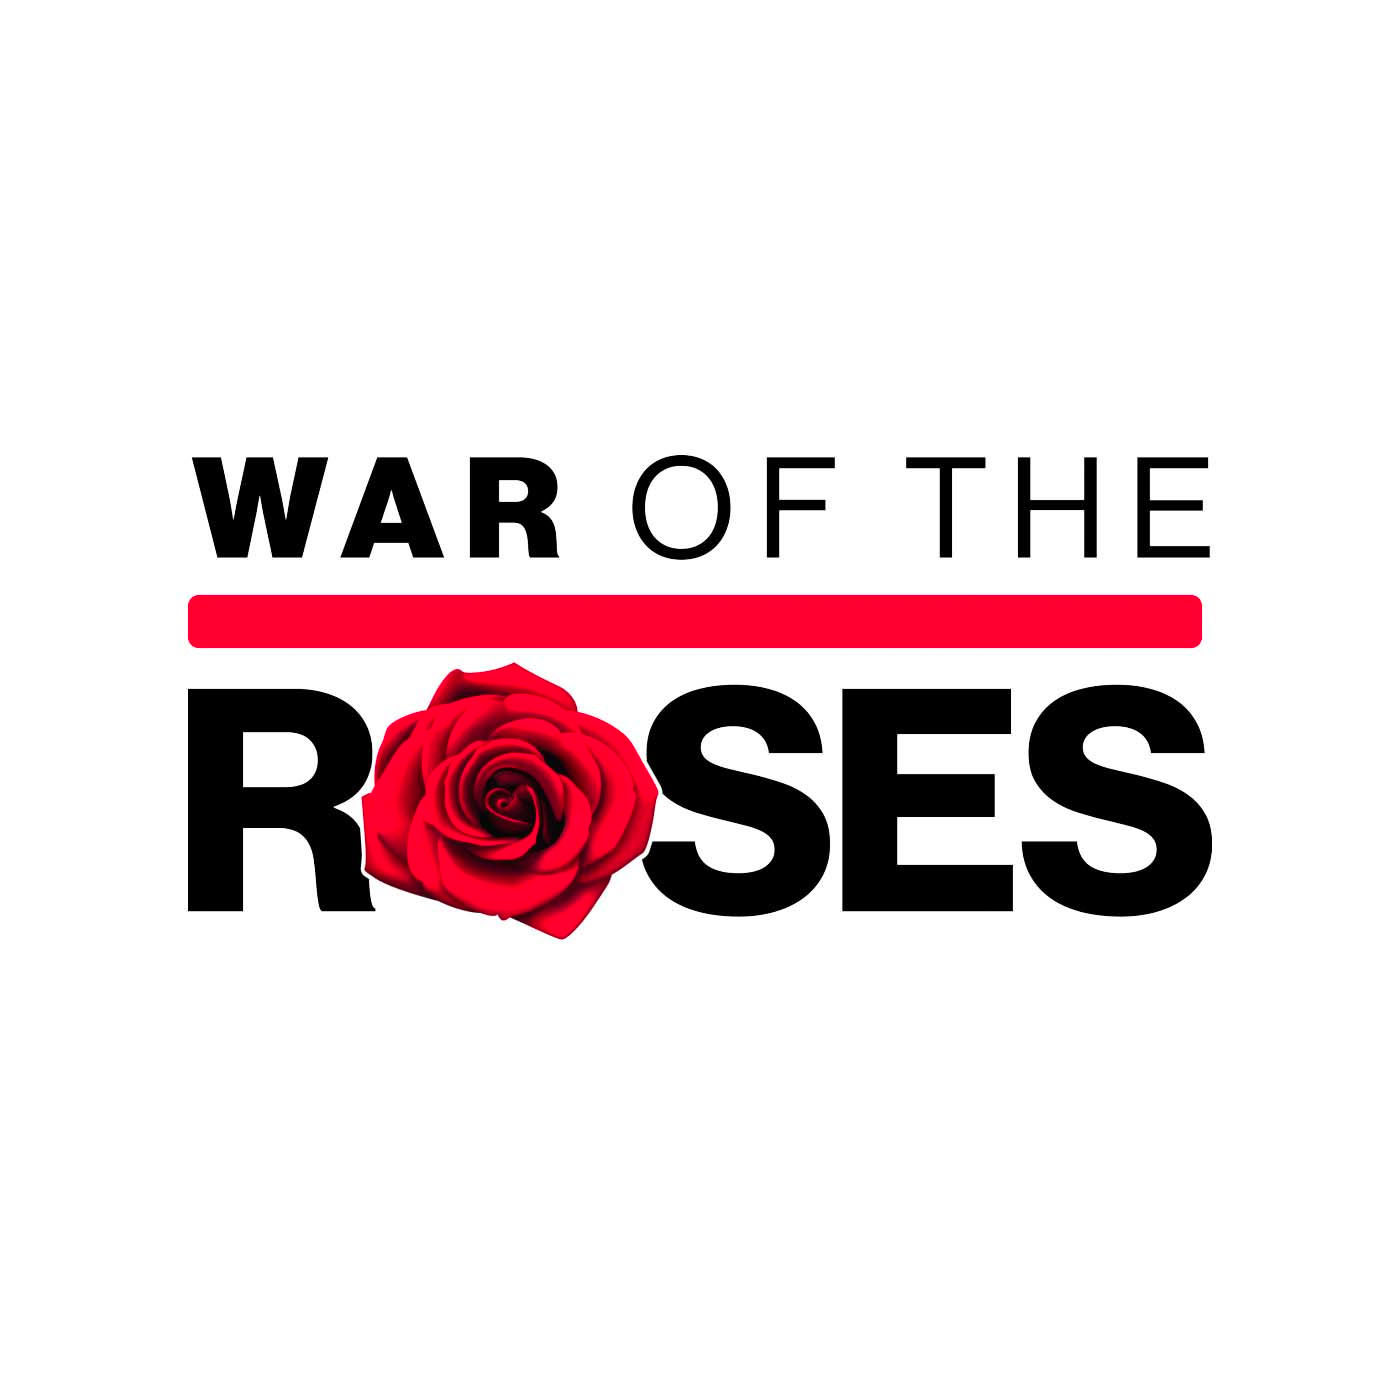 I wanna know but not enough to get caught snooping - War of the Roses